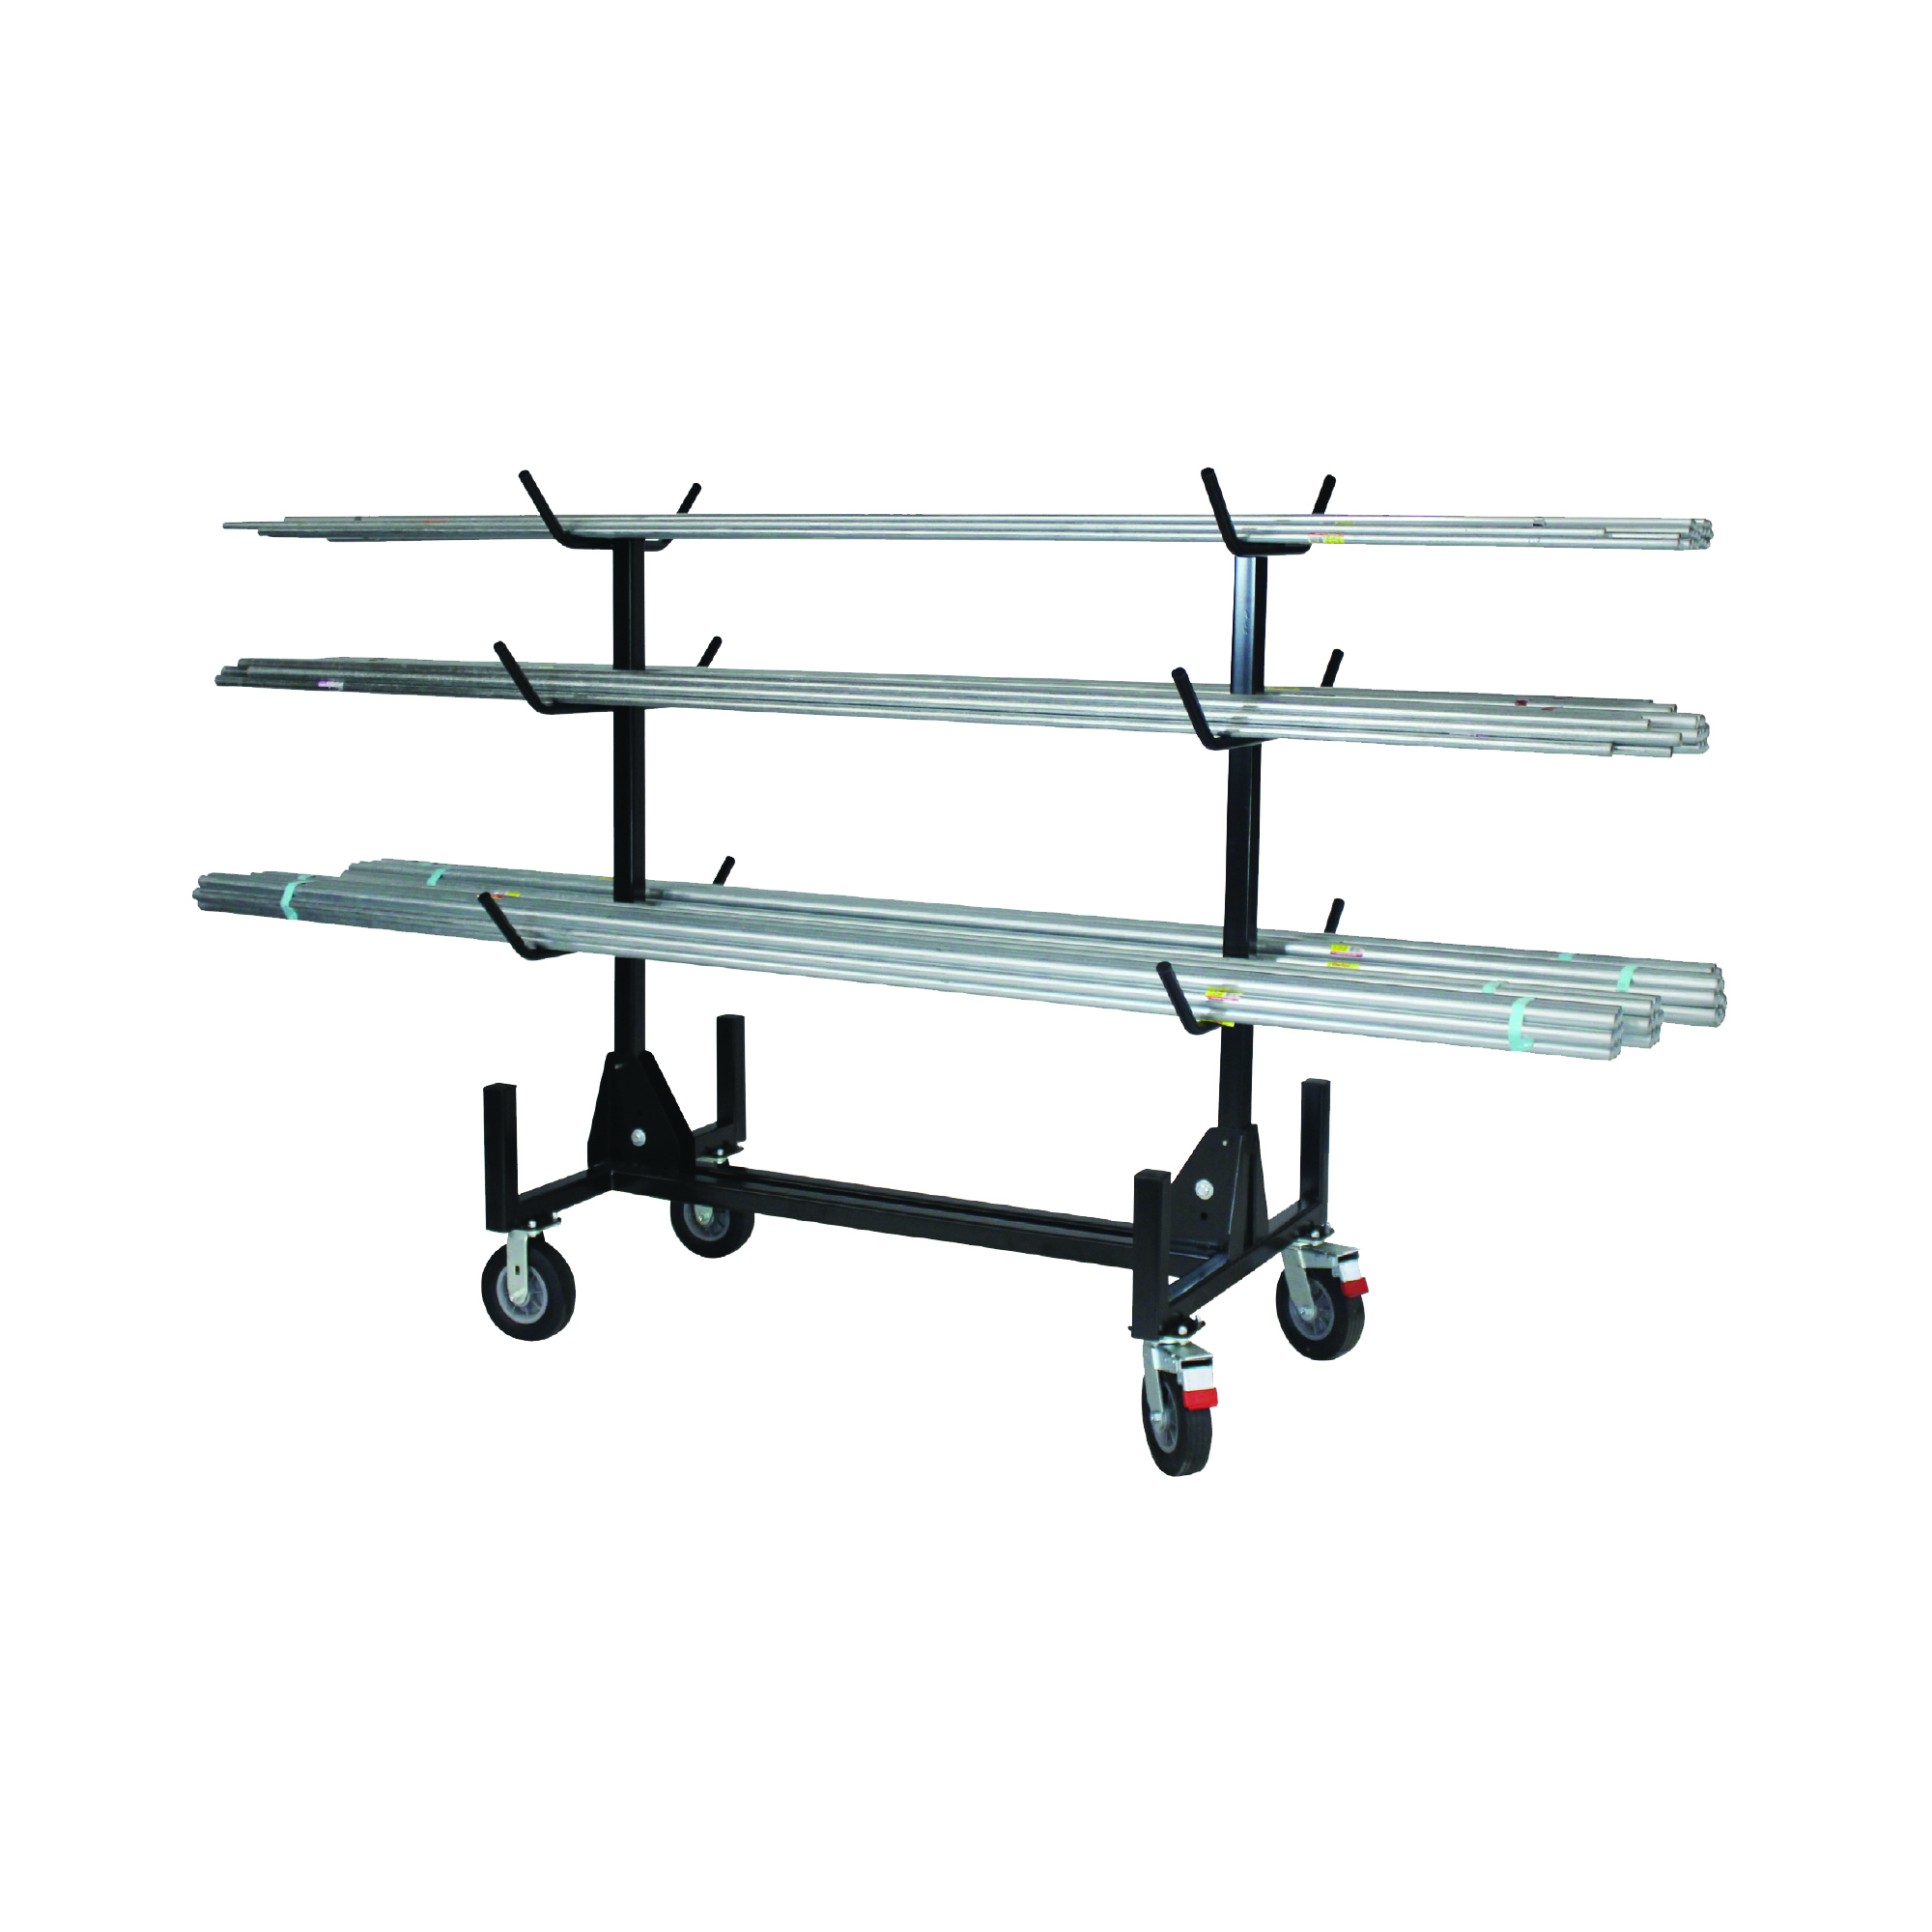 Multipurpose conduit, pipe and strut rack is designed to enhance material storage and mobility on the jobsite. Holds up to 1,000 pounds on the Conduit and Pipe Rack, while eliminating tripping hazards on the jobsite.